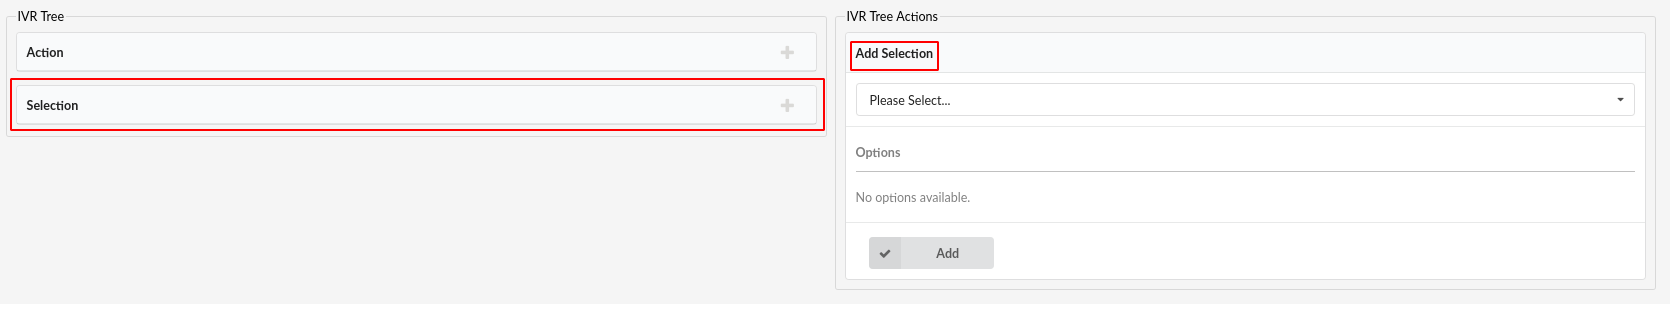 32-ivr-tree-add-selection.png